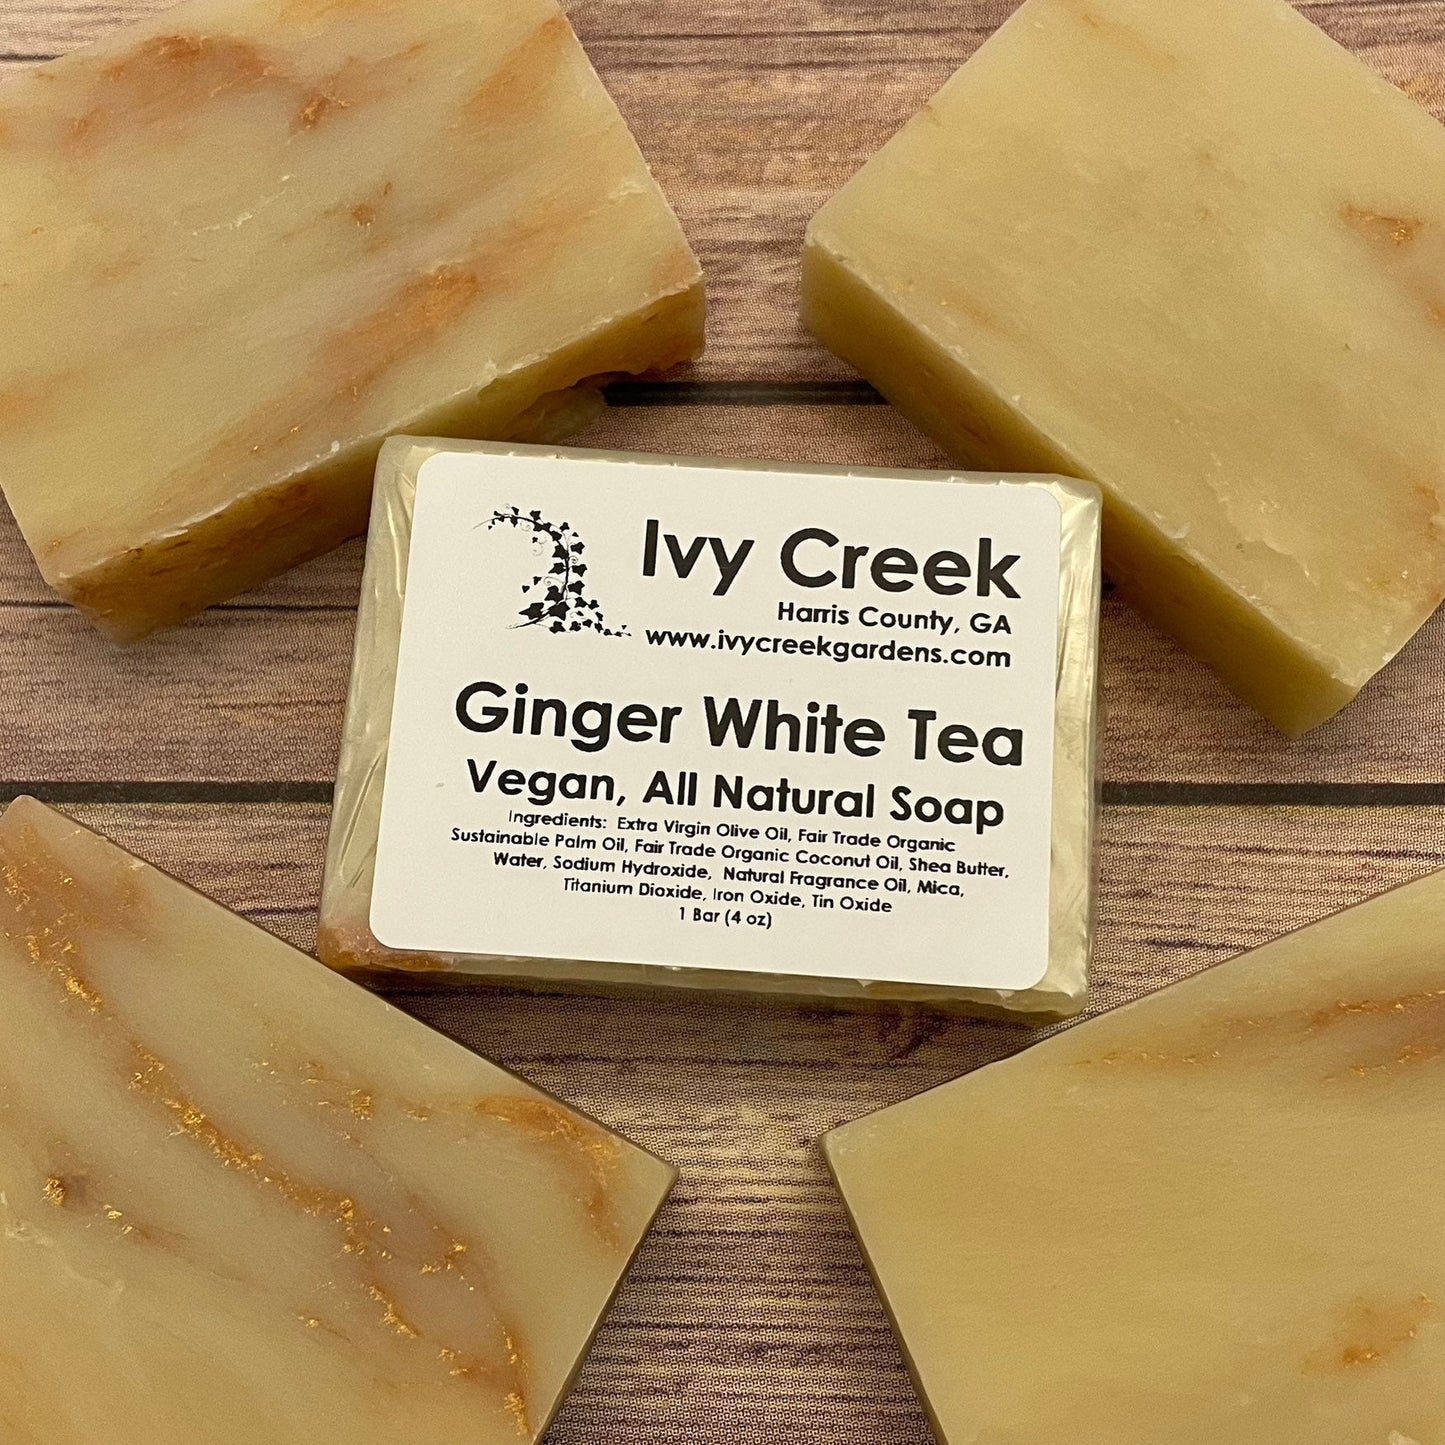 Ivy Creek Ginger White Tea Soap, Vegan Soap, Natural Soap, Holistic Soap, Gifts for Her, Gifts for Mom, Fair Trade Soap - 4oz